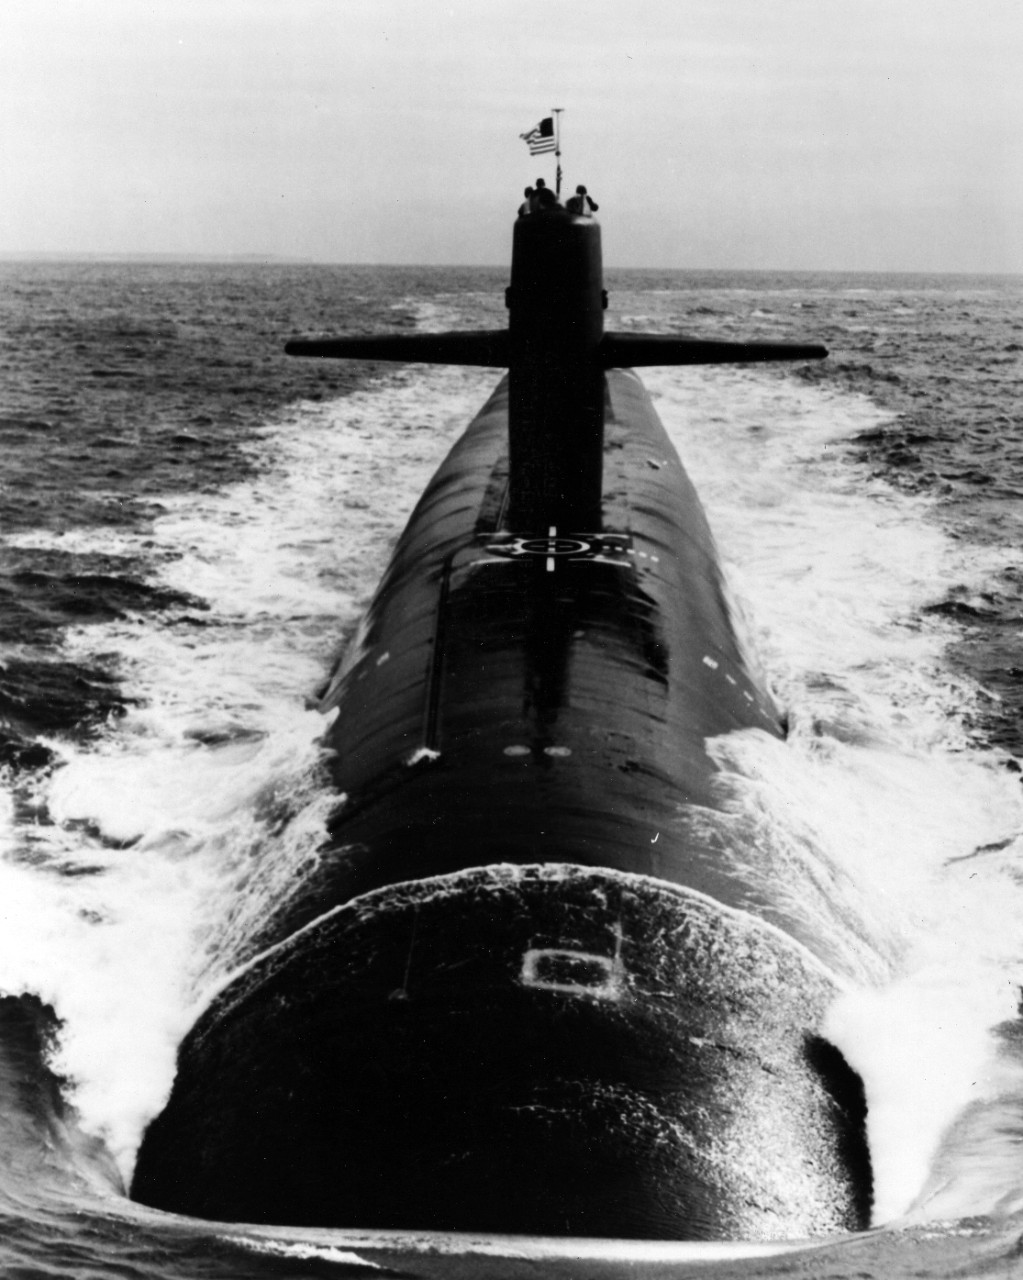 Starboard view of submarine USS Georgia surfaced at sea